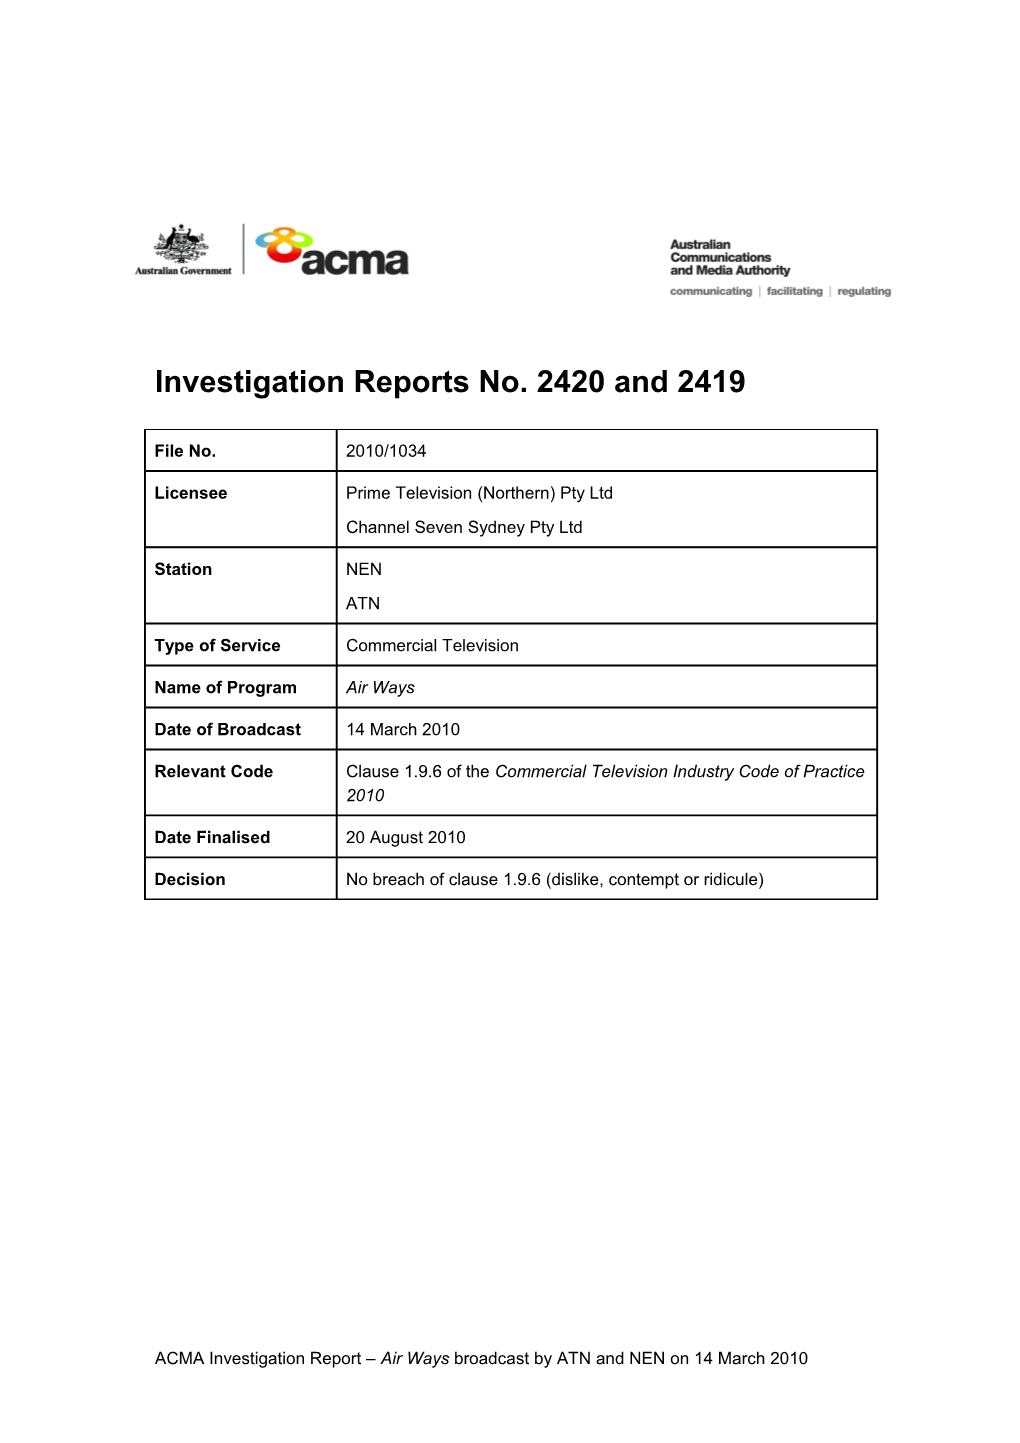 NEN and ATN - ACMA Investigation Reports 2420 and 2419